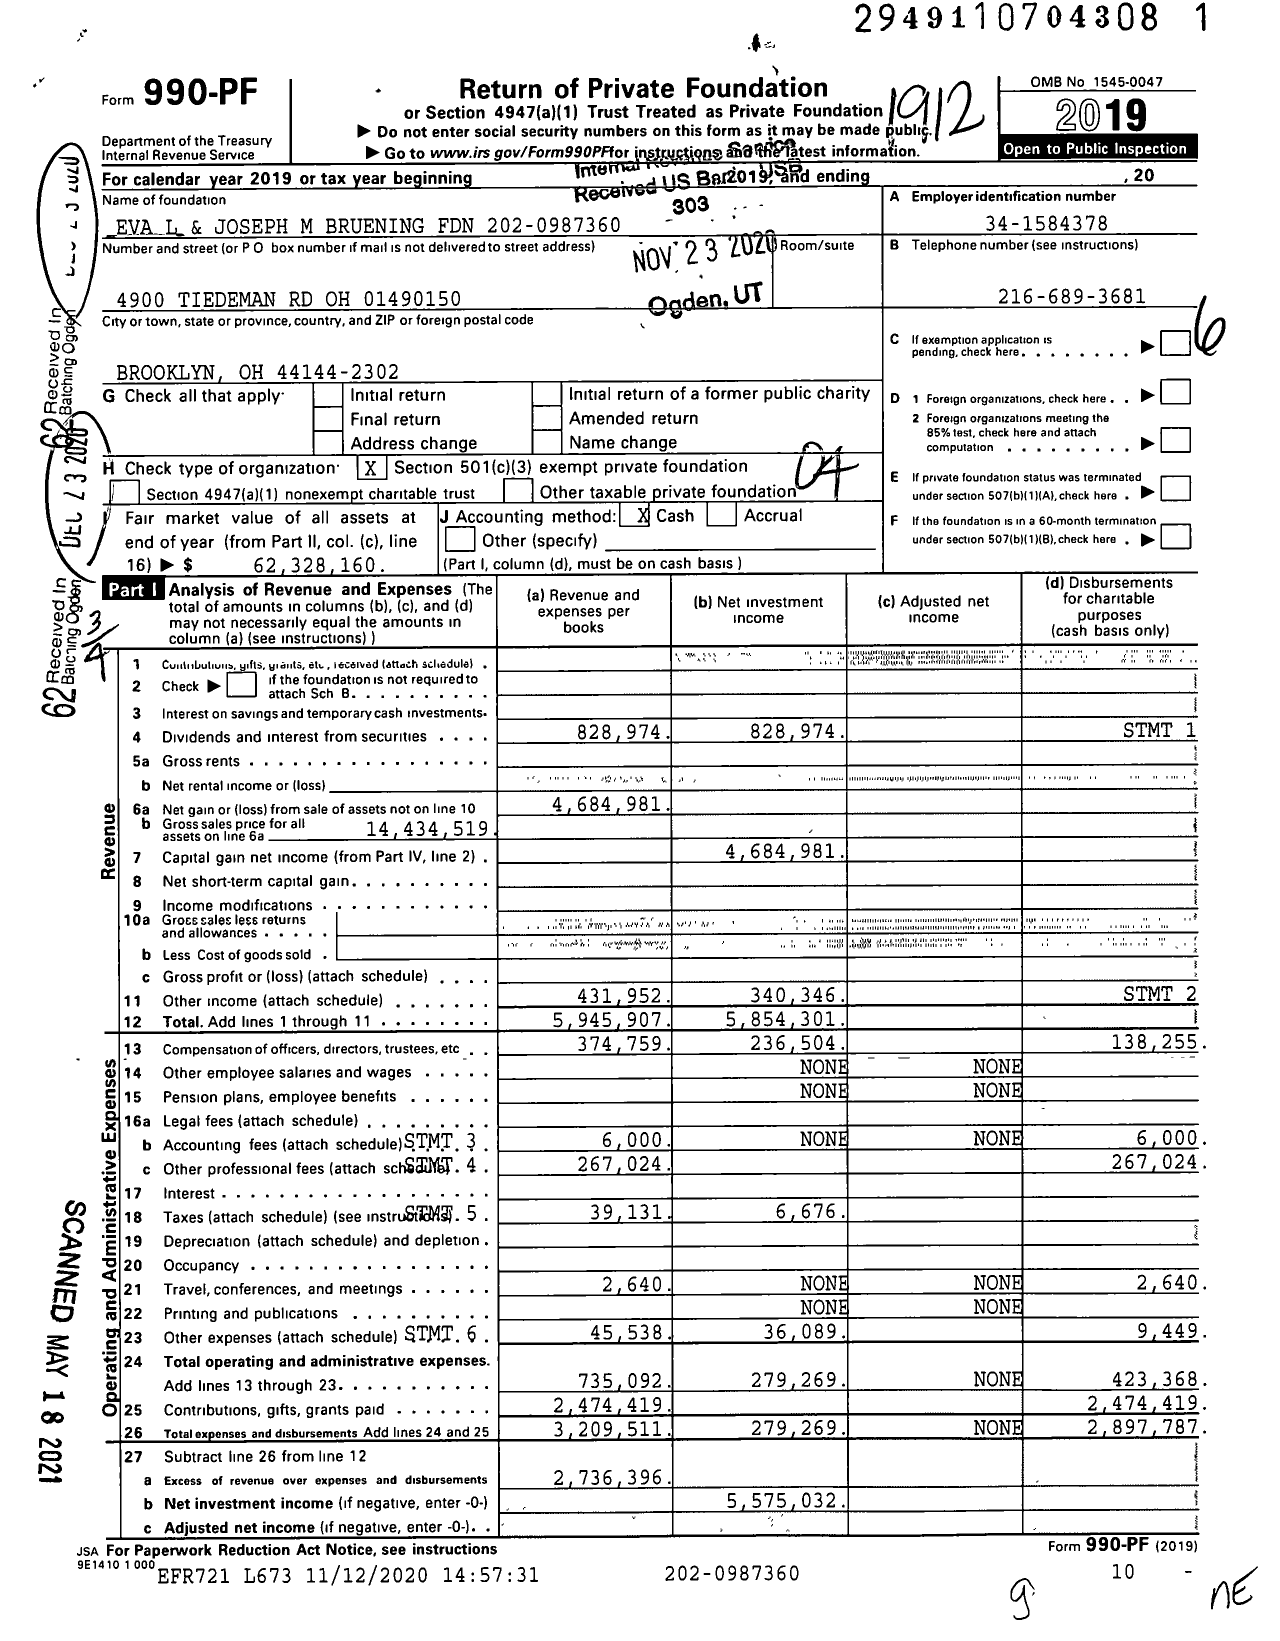 Image of first page of 2019 Form 990PF for Eva L. and Joseph M. Bruening Foundation